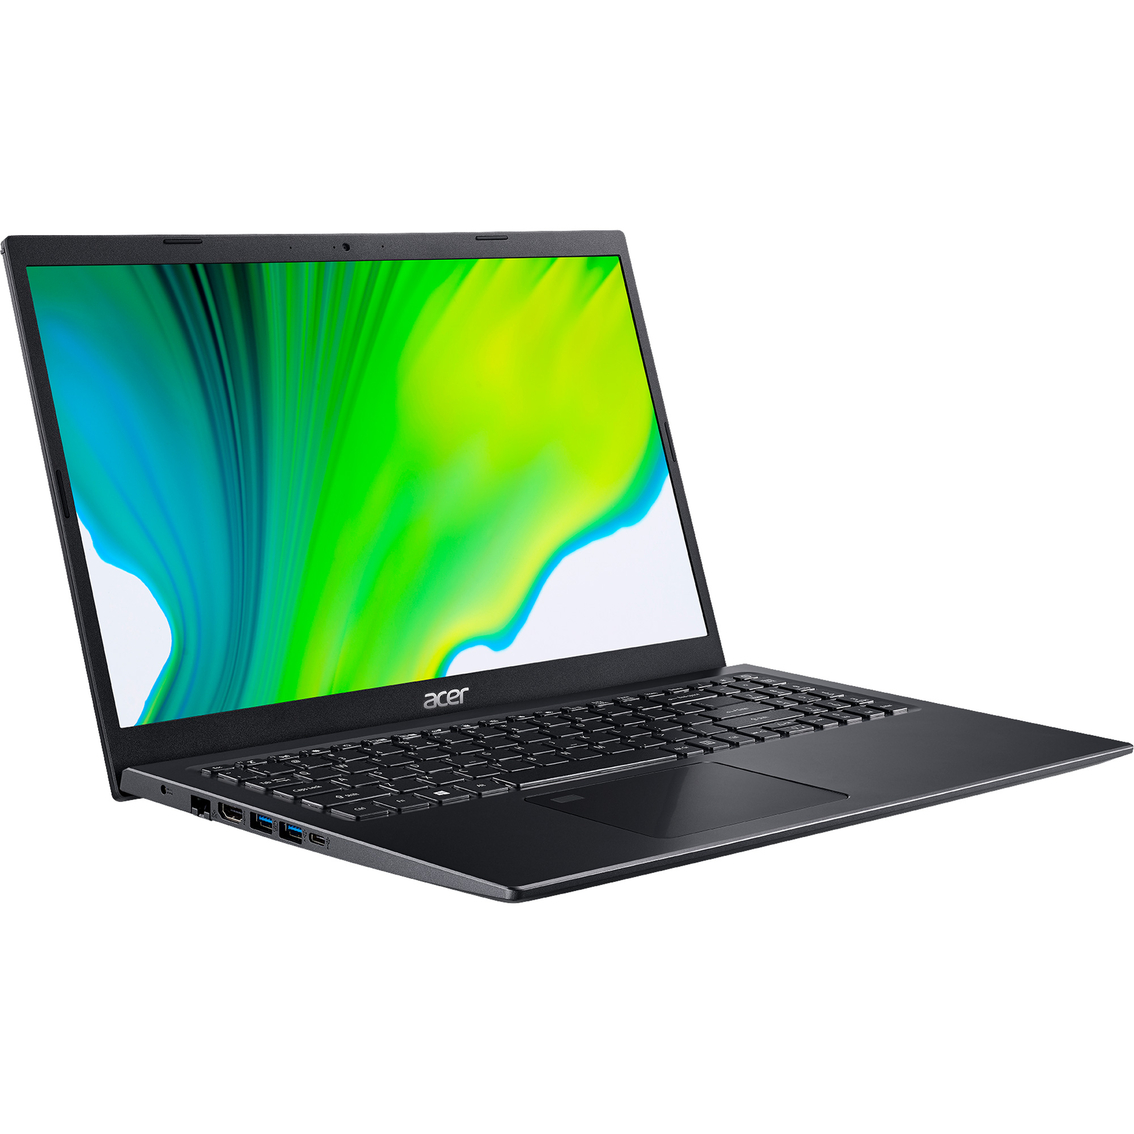 Military/Veterans: Save $170 on Acer Aspire 5 15.6 in. Intel Core i5 2.4GHz 8GB RAM 512GB SSD Laptop ($479.00)